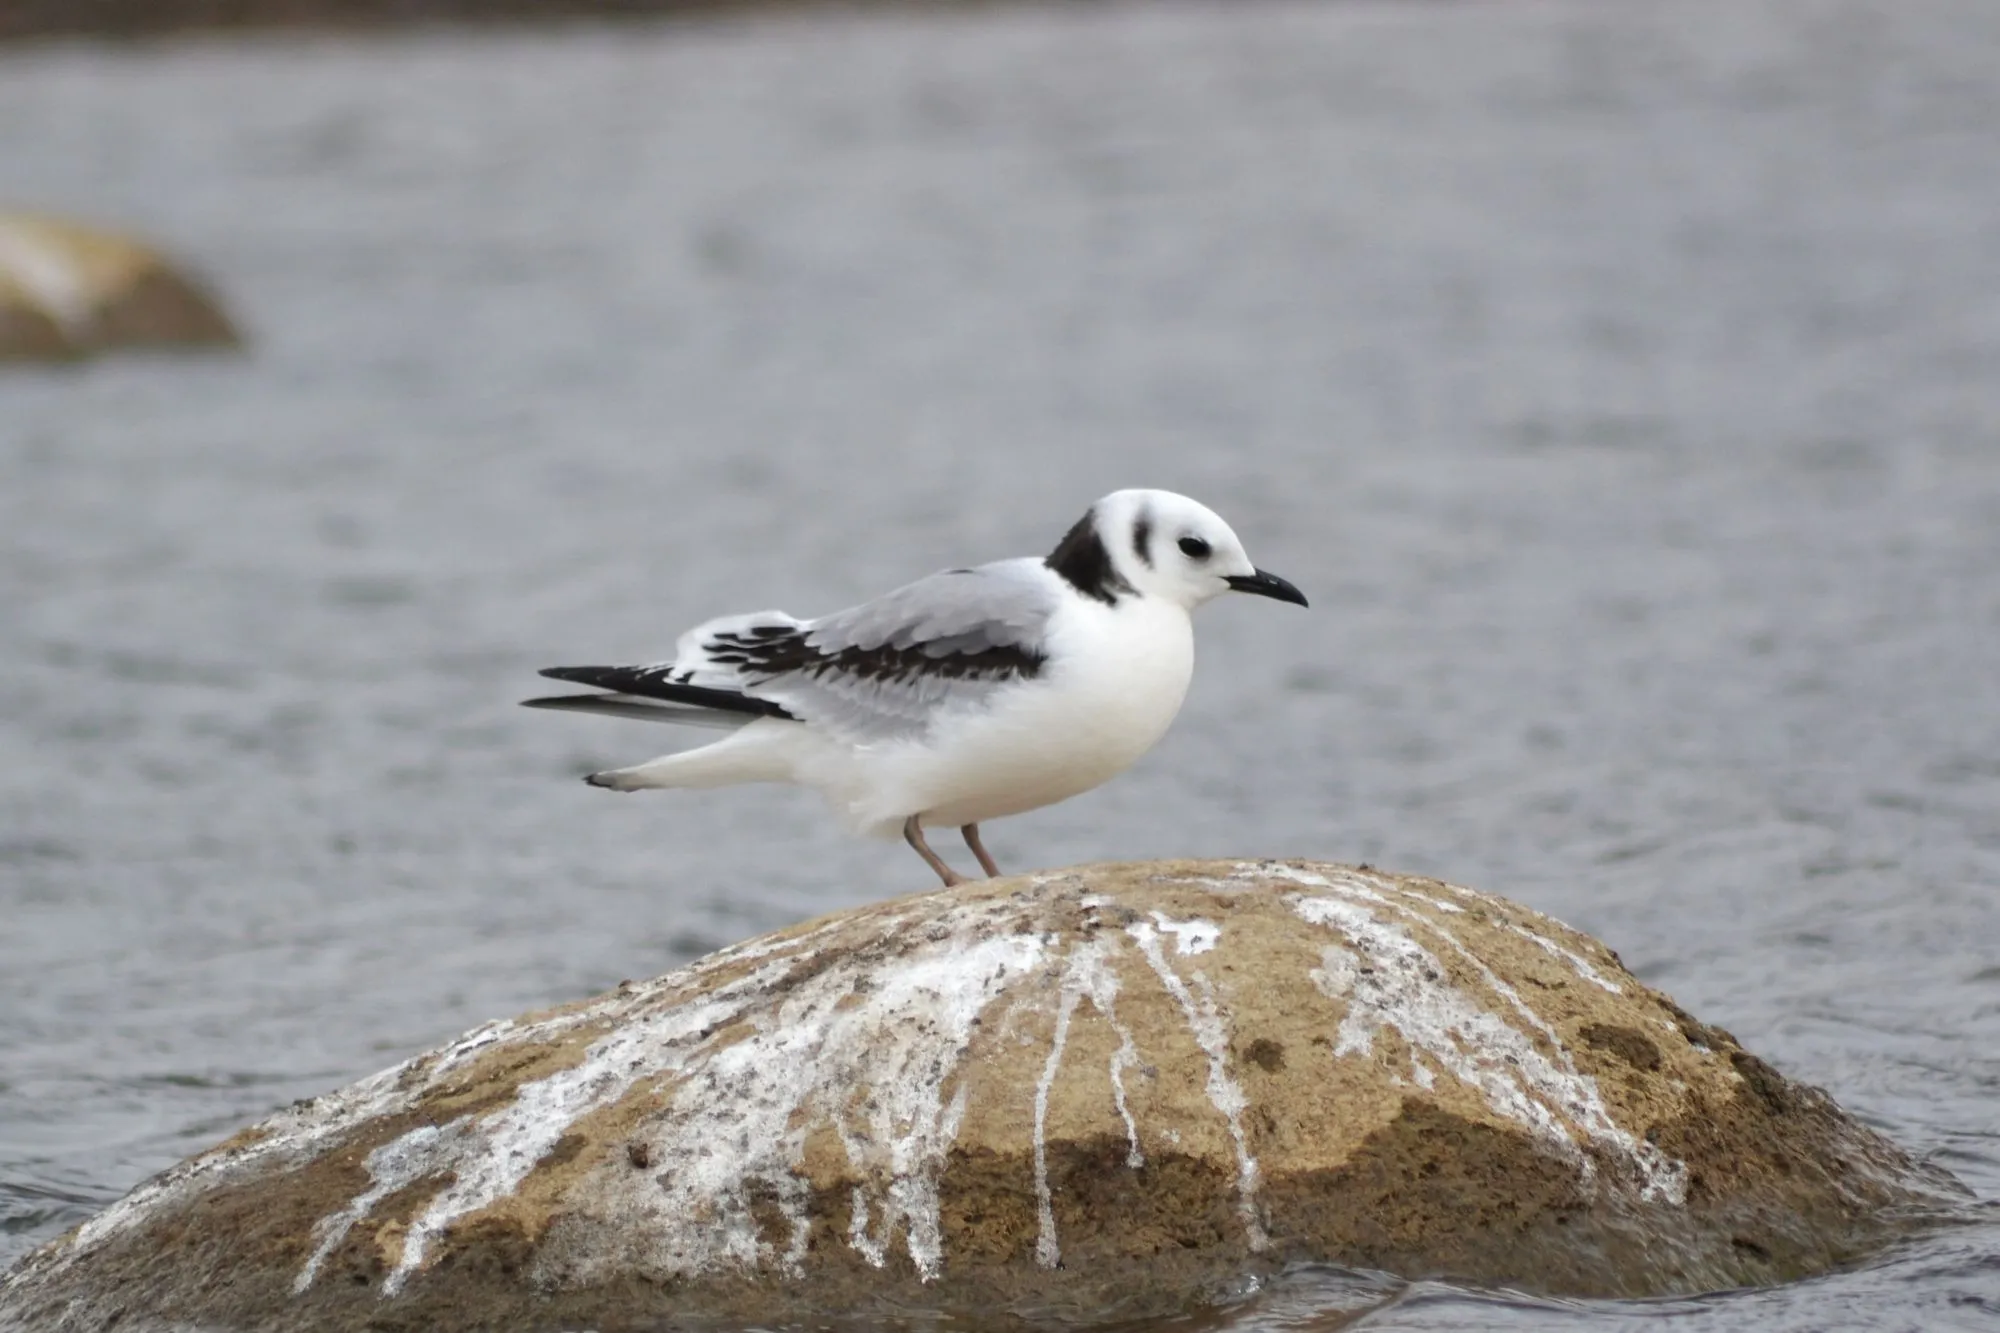 Black-legged kittiwake facts are liked by bird lovers.